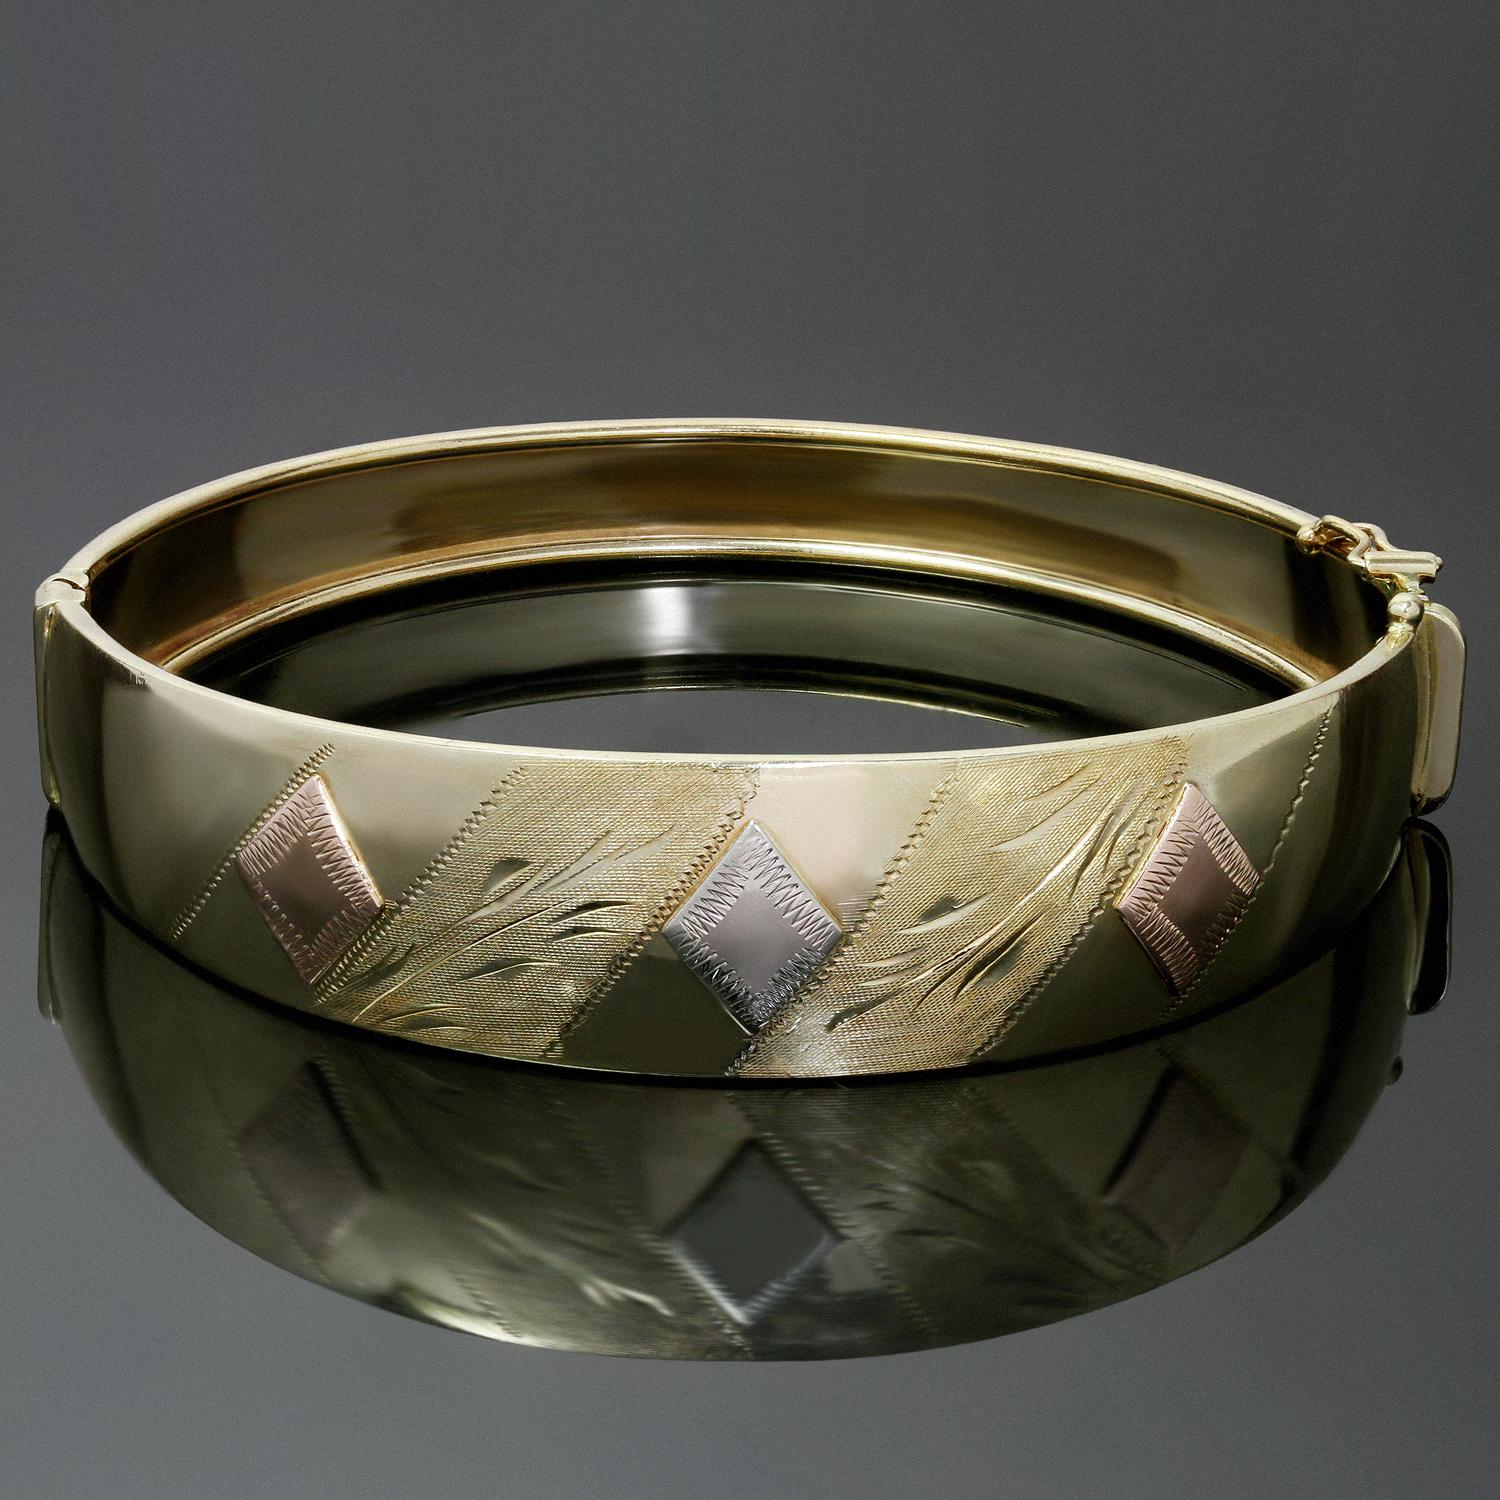 This elegant vintage wide bangle bracelet is crafted in 14k yellow gold and is accented with engraved details and geometric shapes in white and rose gold. Made in United States circa 1980s. Measurements: 0.62